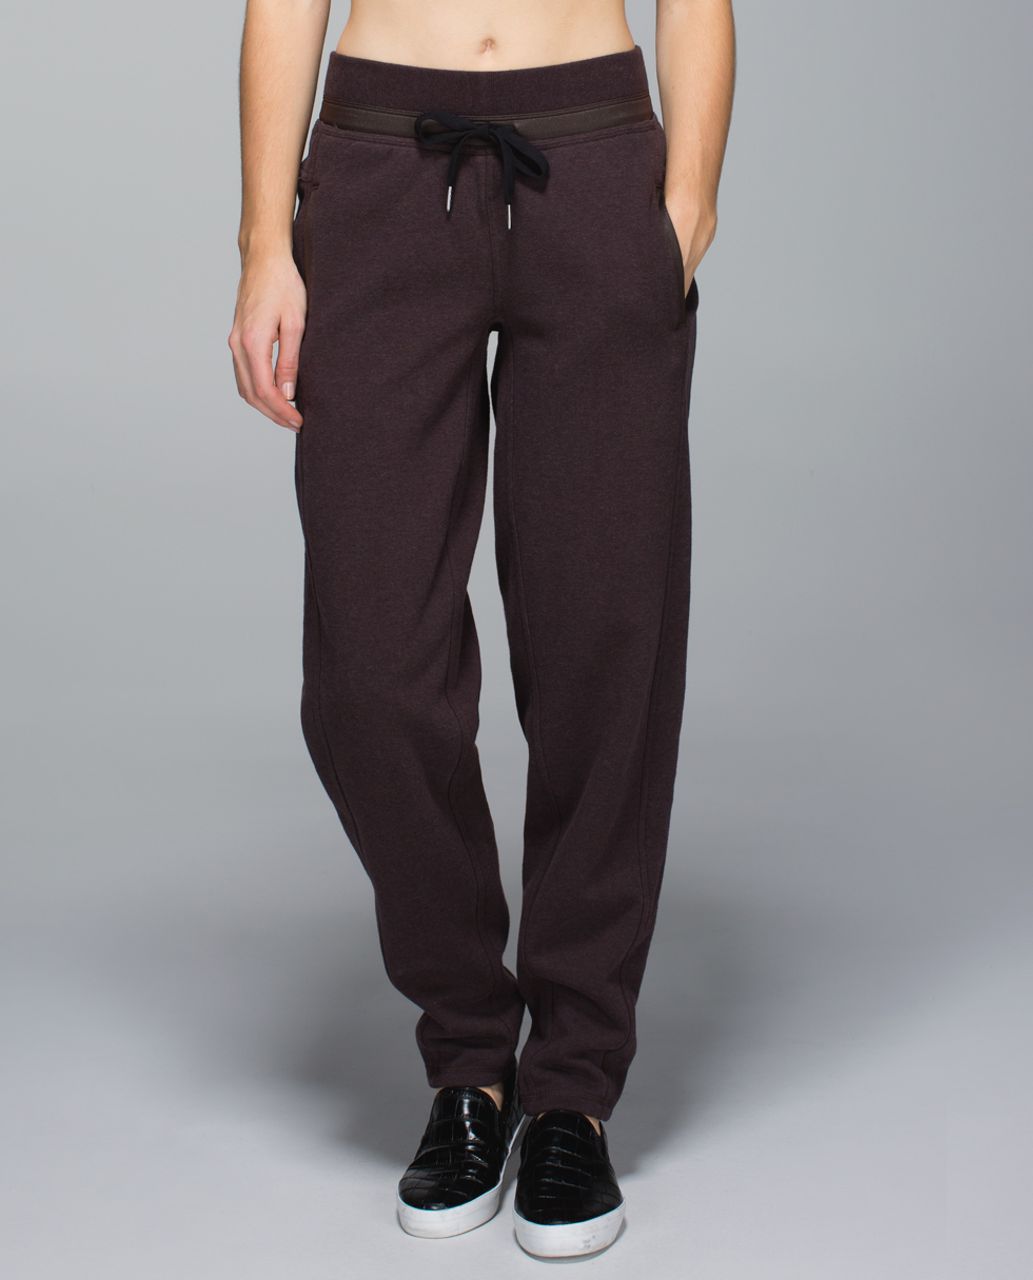 Lululemon Karmacollected Pant - Heathered Rich Earth / Rich Earth